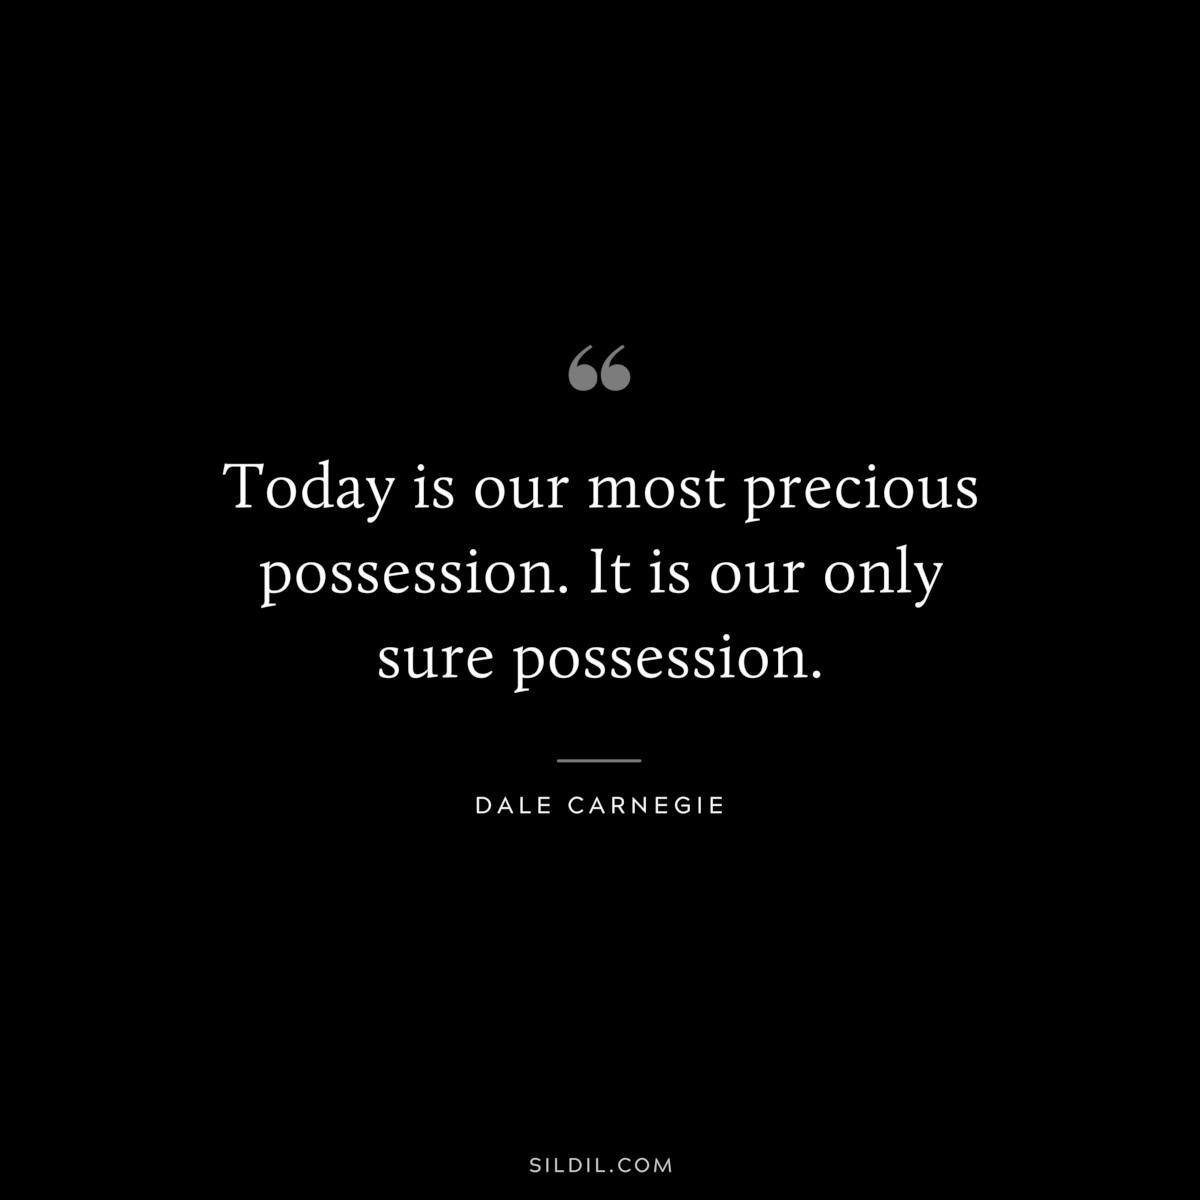 Today is our most precious possession. It is our only sure possession.― Dale Carnegie